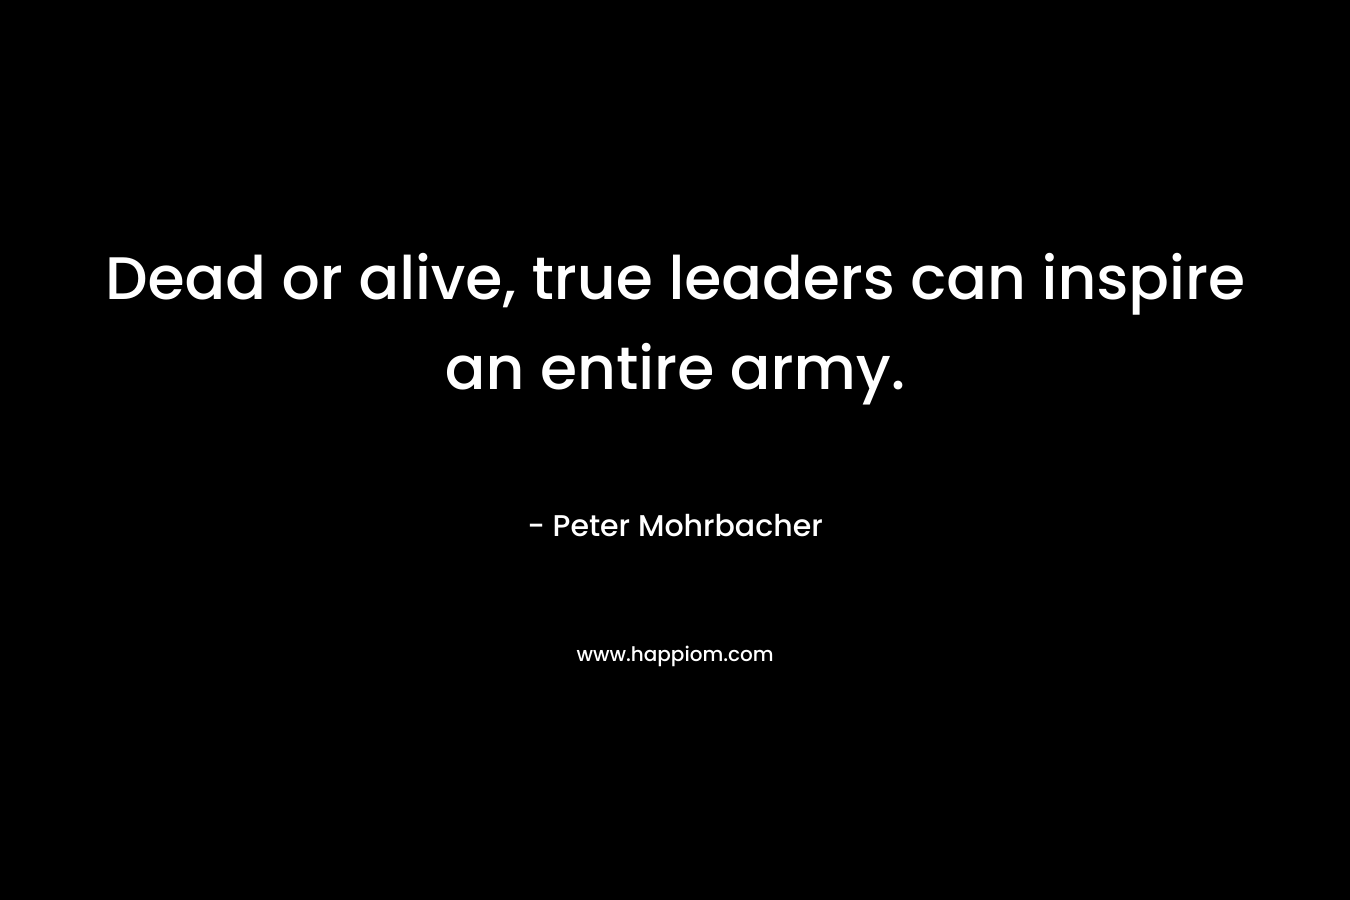 Dead or alive, true leaders can inspire an entire army.